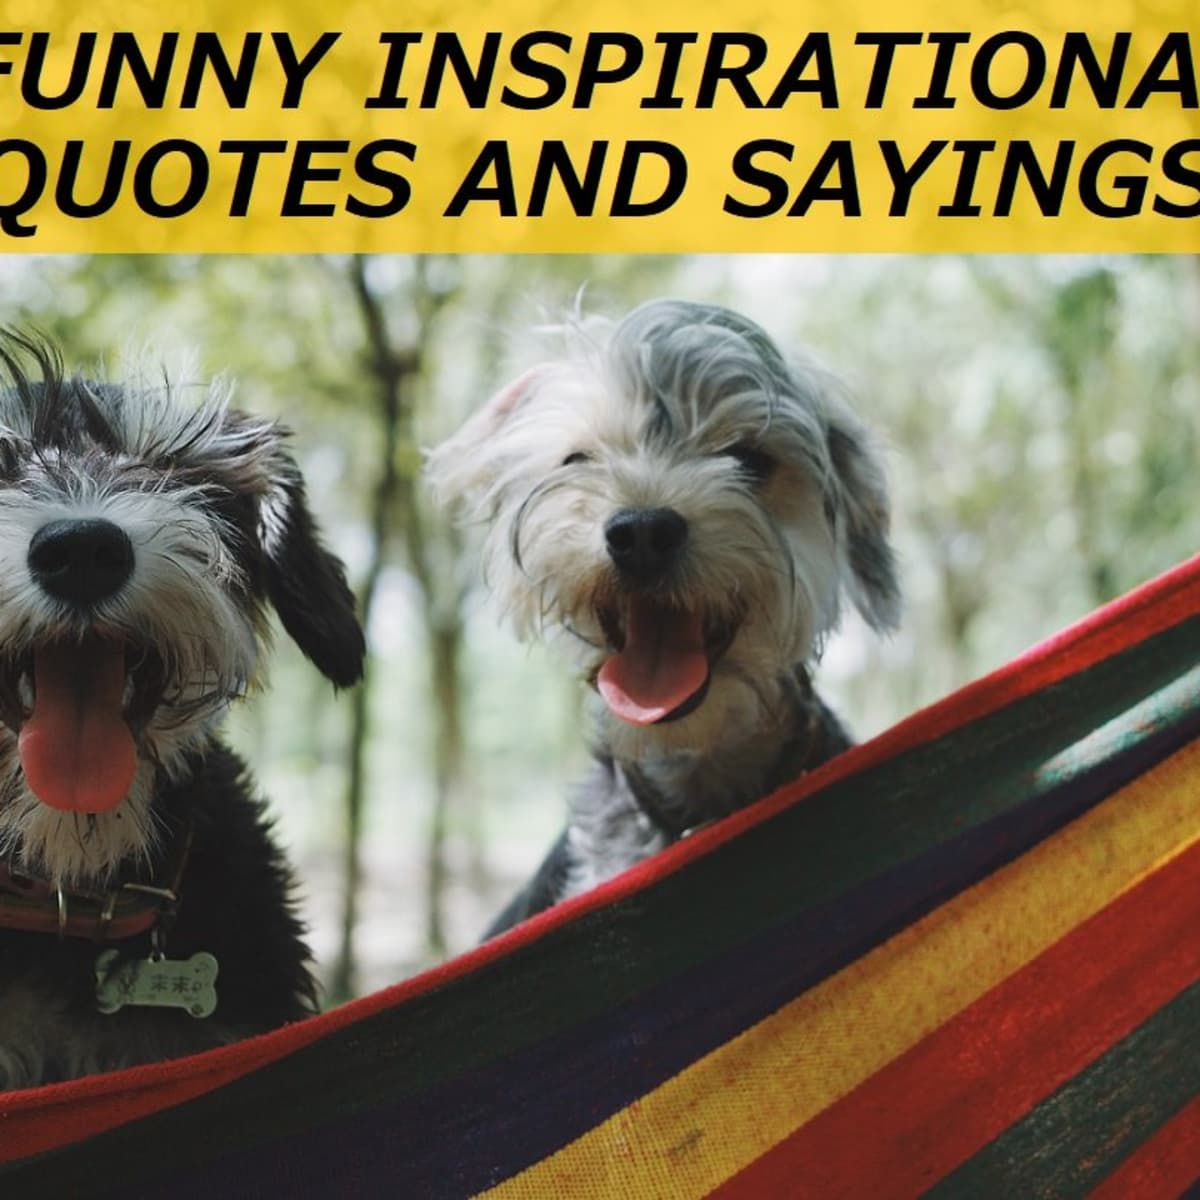 100+ Funny Inspirational Quotes and Sayings - LetterPile